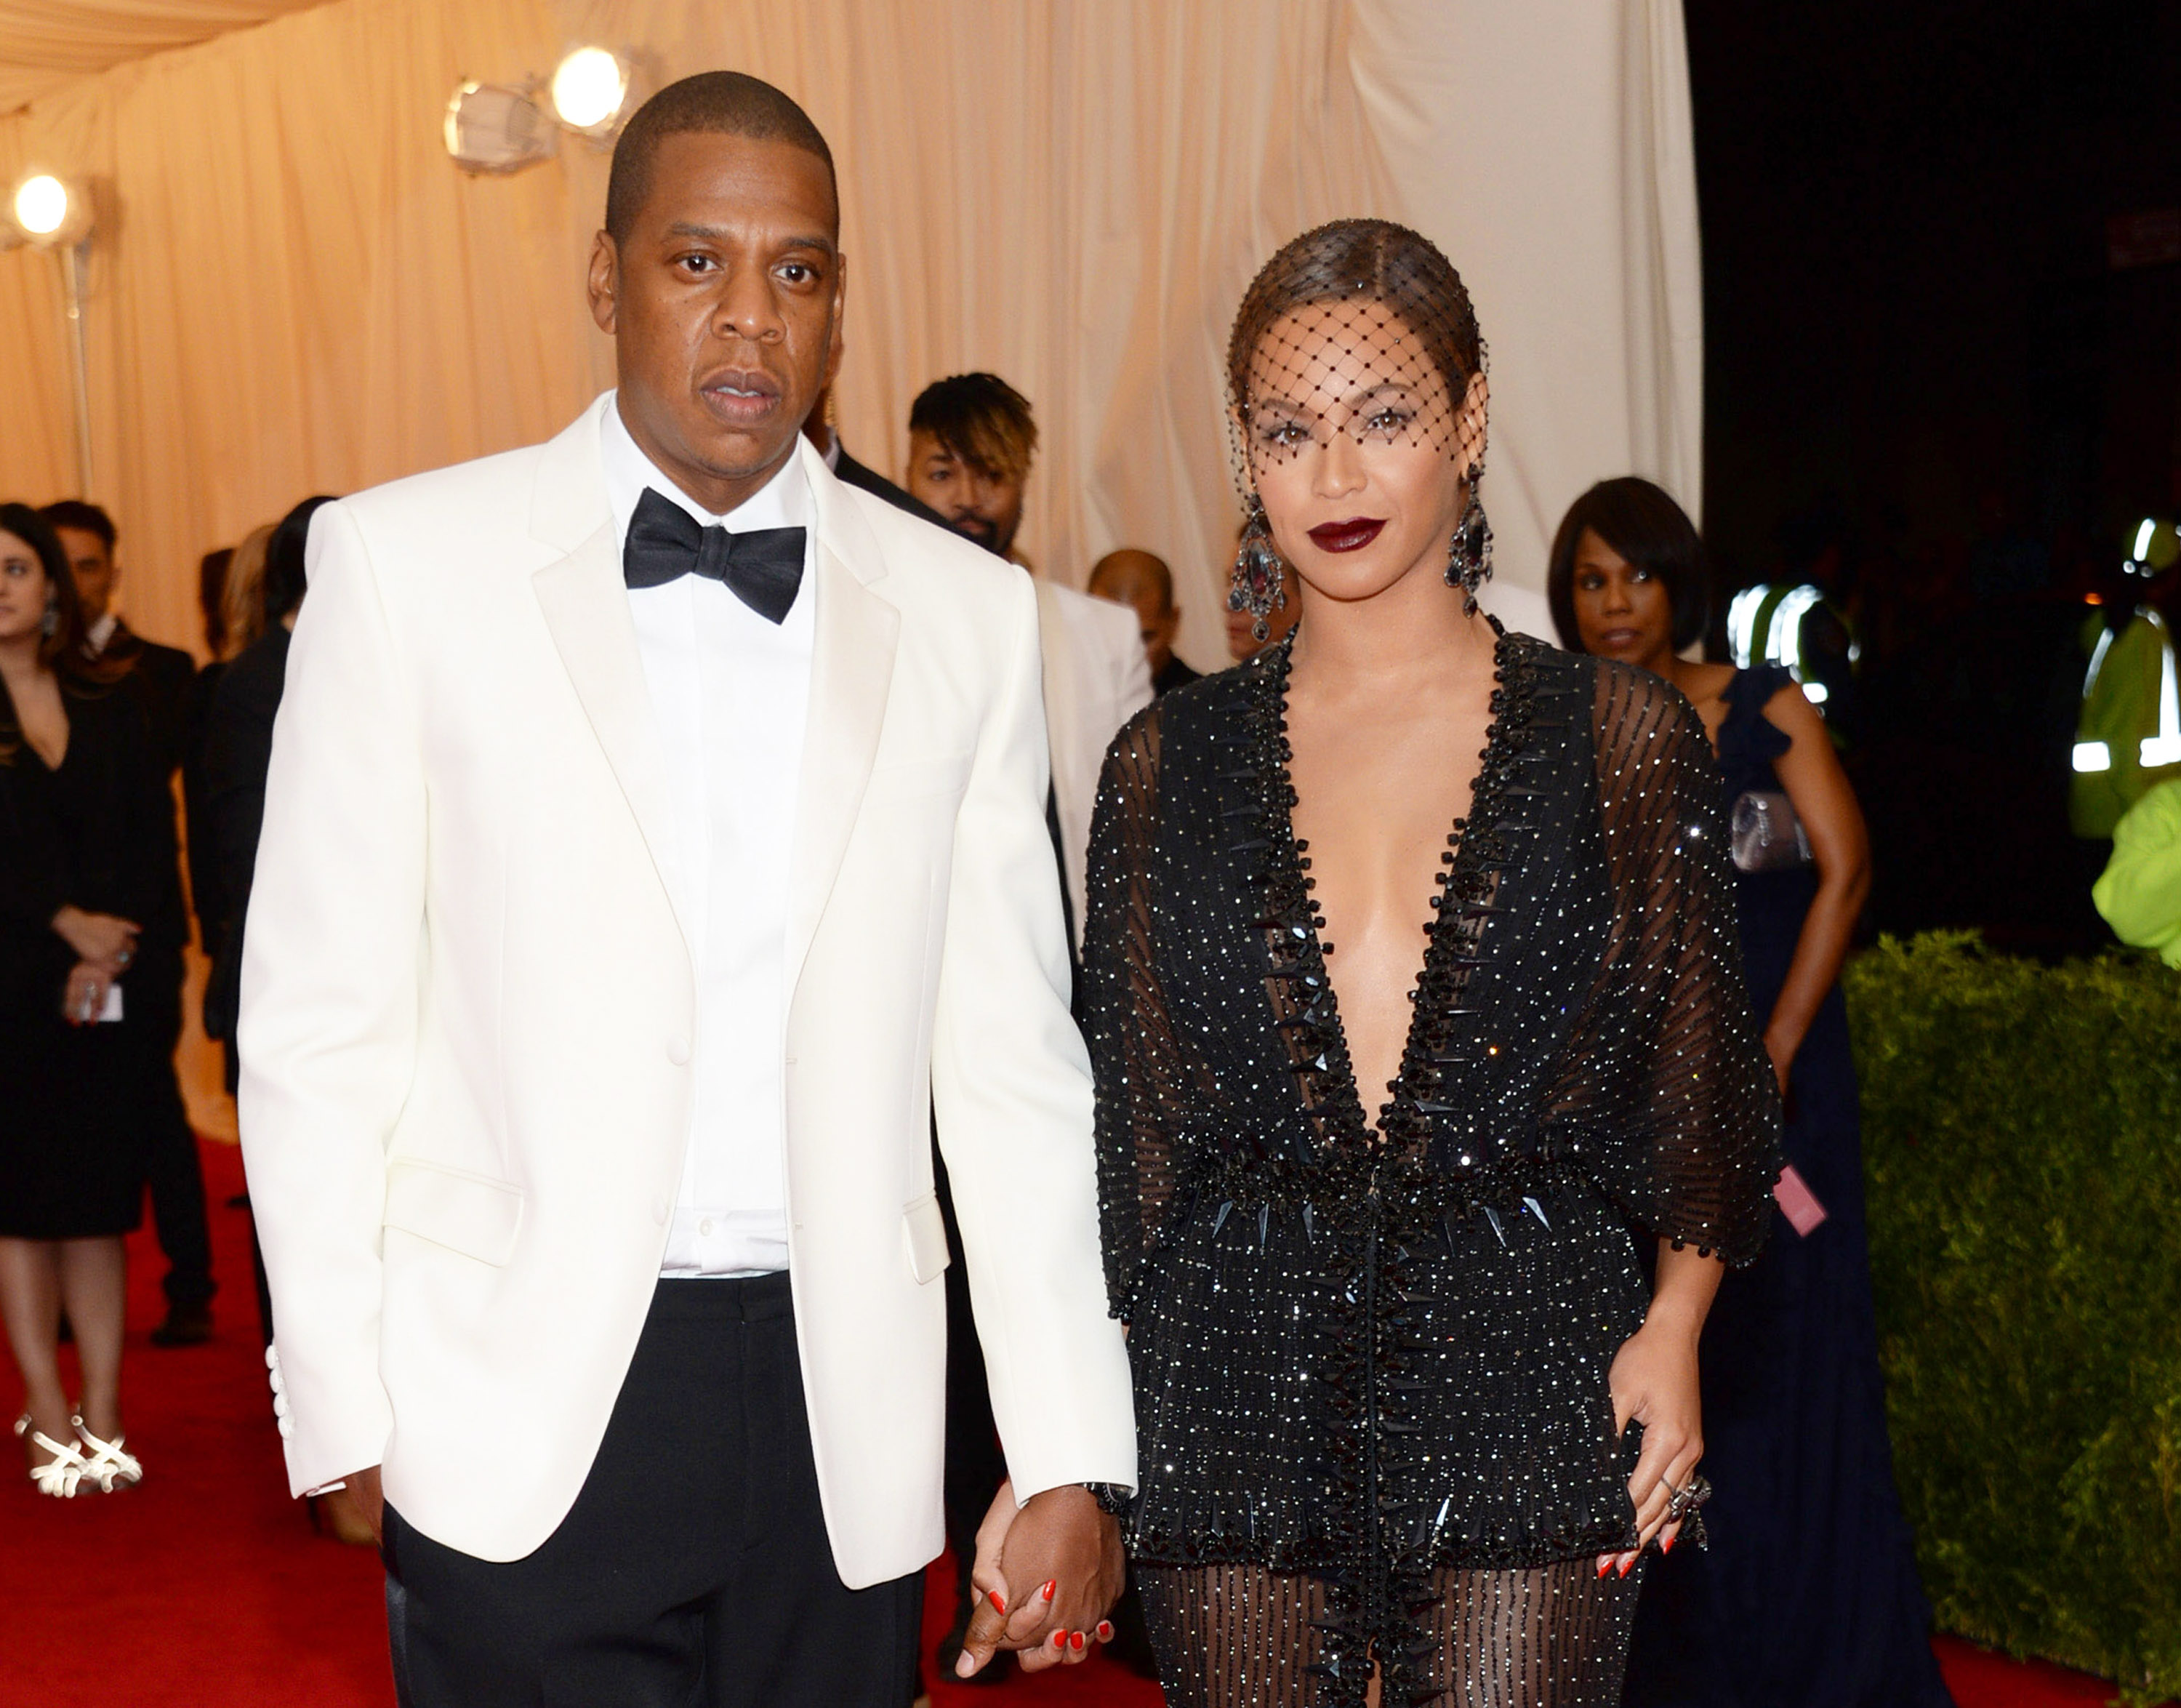 Jay Z and Beyonce at The Metropolitan Museum of Art's Costume Institute benefit gala.